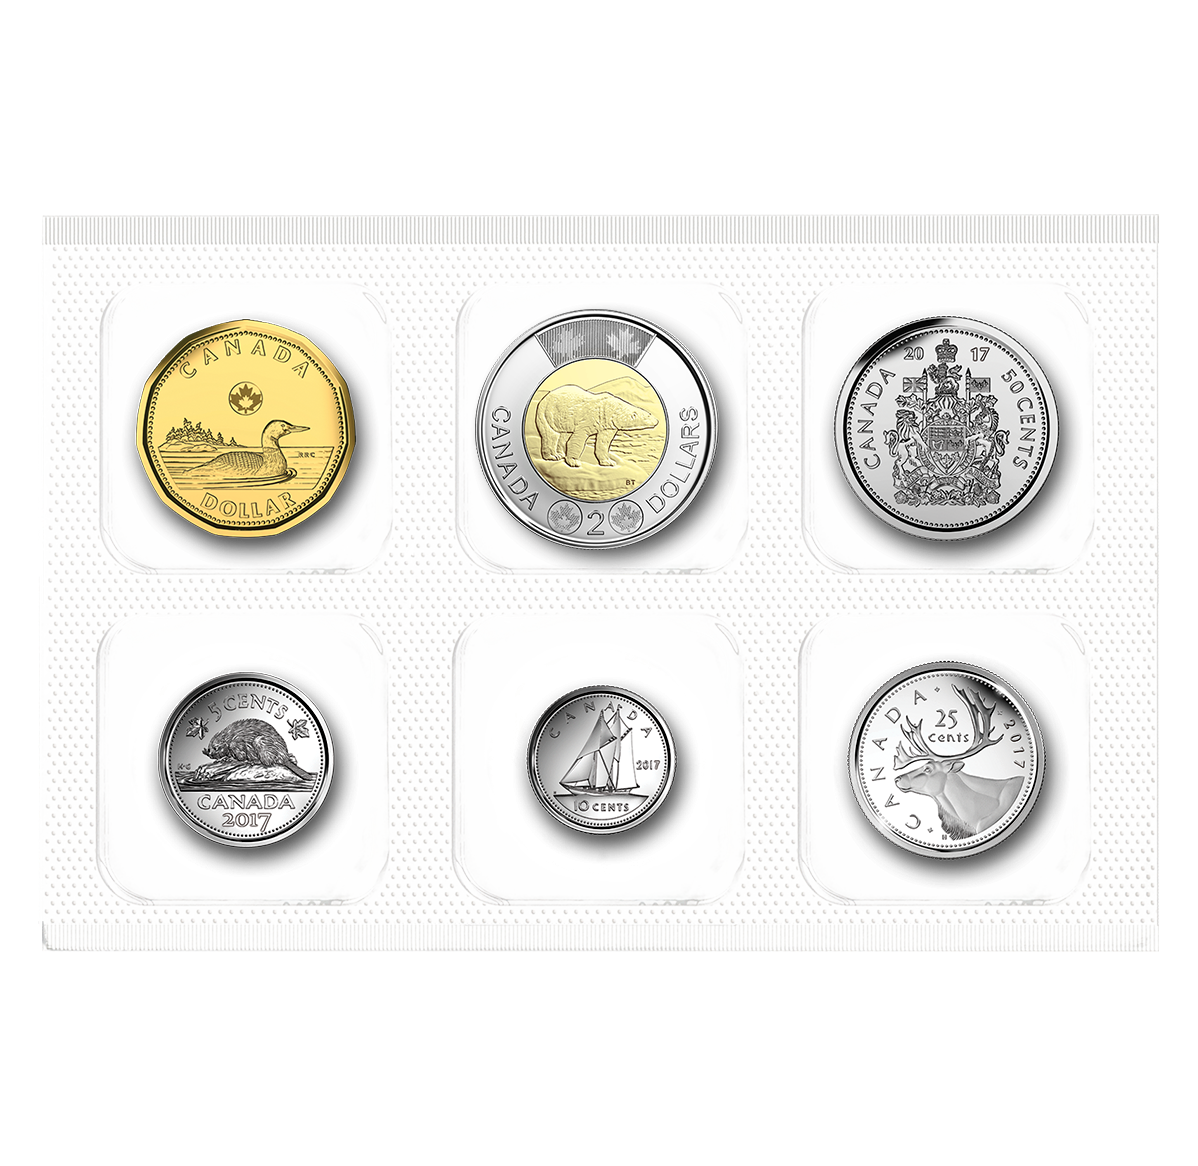 Details about   2017 CANADA CLASSIC 3 COIN SET FROM SPECIAL WRAPPED ROLLS ENCAPSULATED 